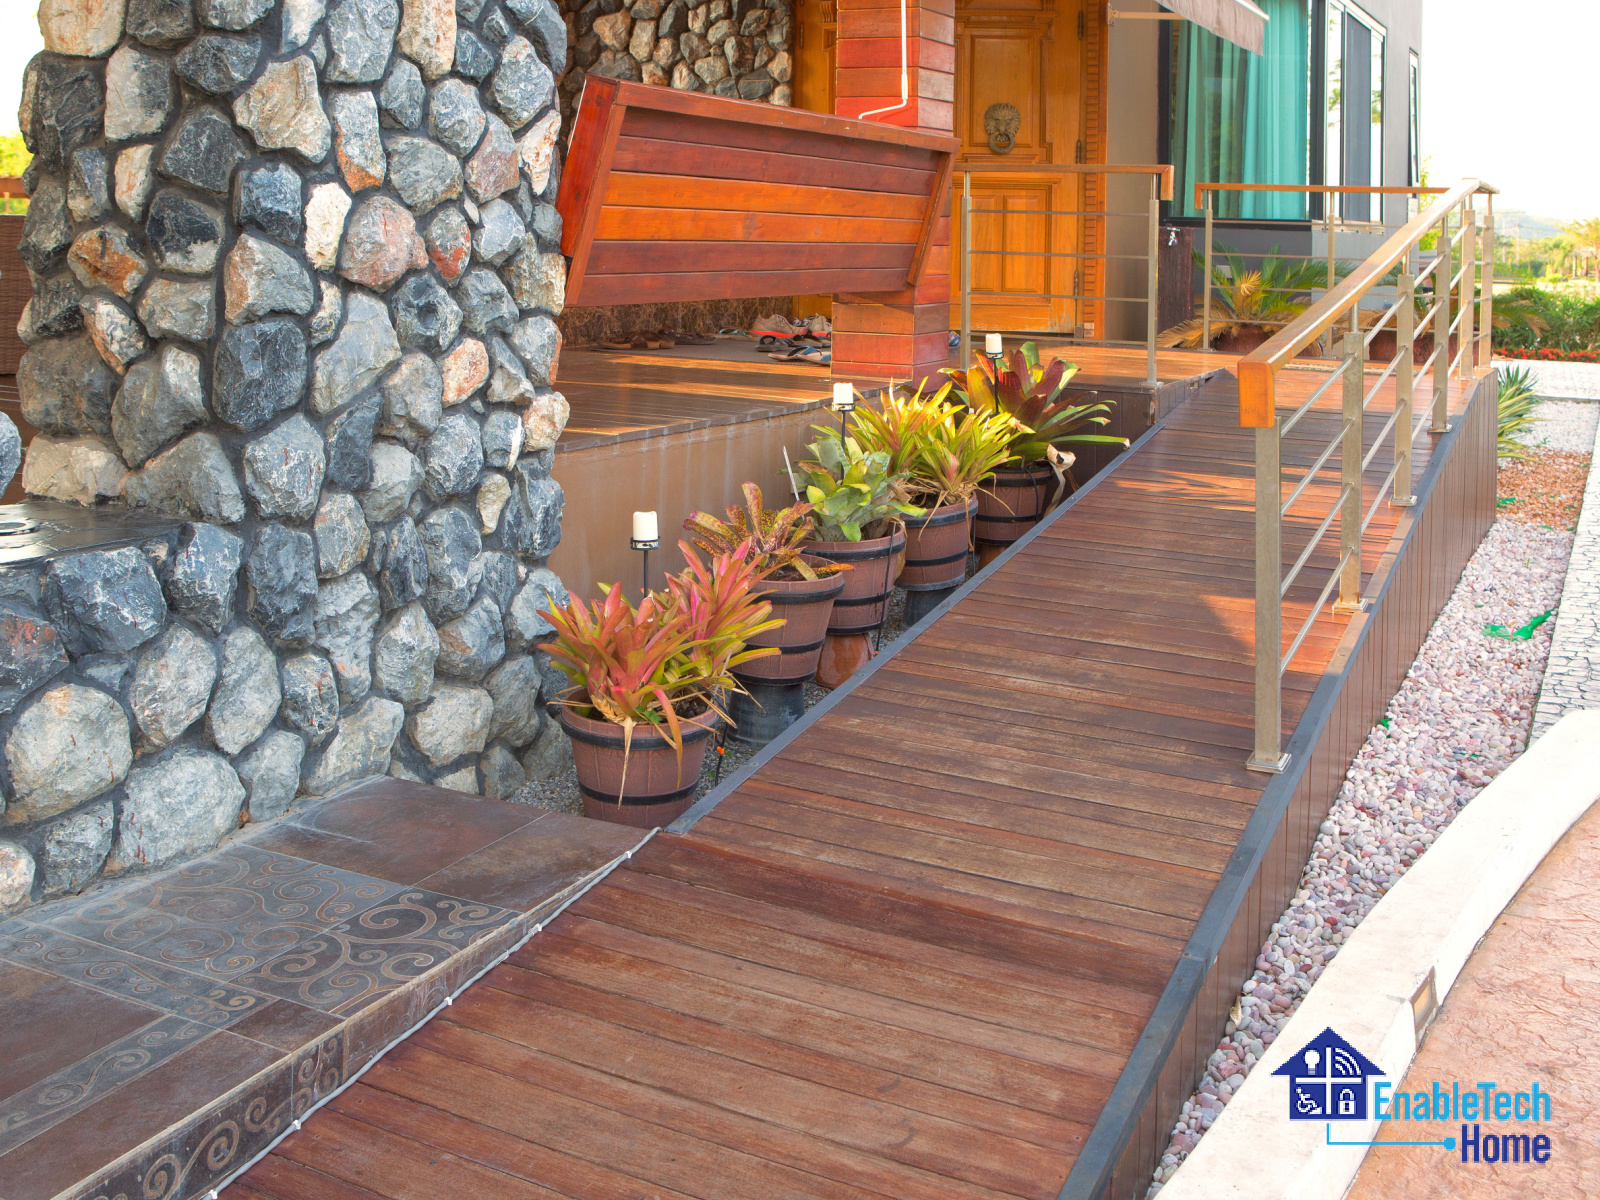 Increase Safety with Expert Grab Bar & Wheelchair Ramp Home Modifications in Pacific